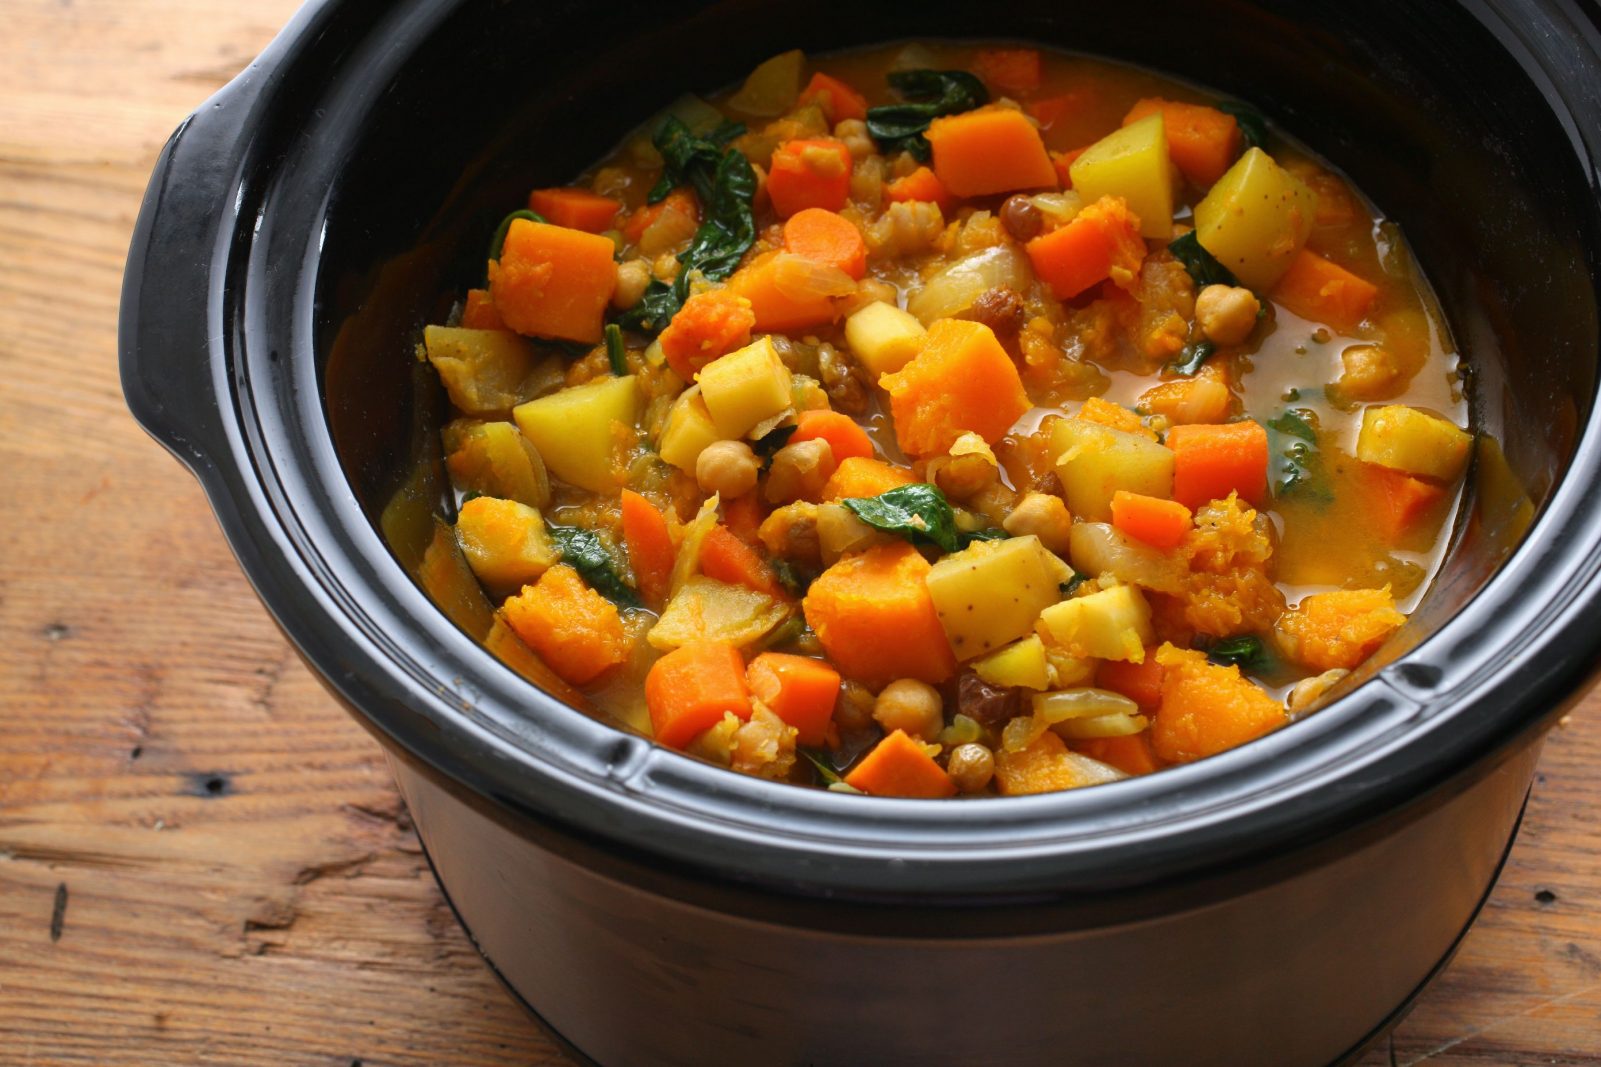 🍲 Make a Cozy Slow-Cooker Dinner and We’ll Give You a Fluffy Dog Breed to Adopt root vegetables in slow cooker